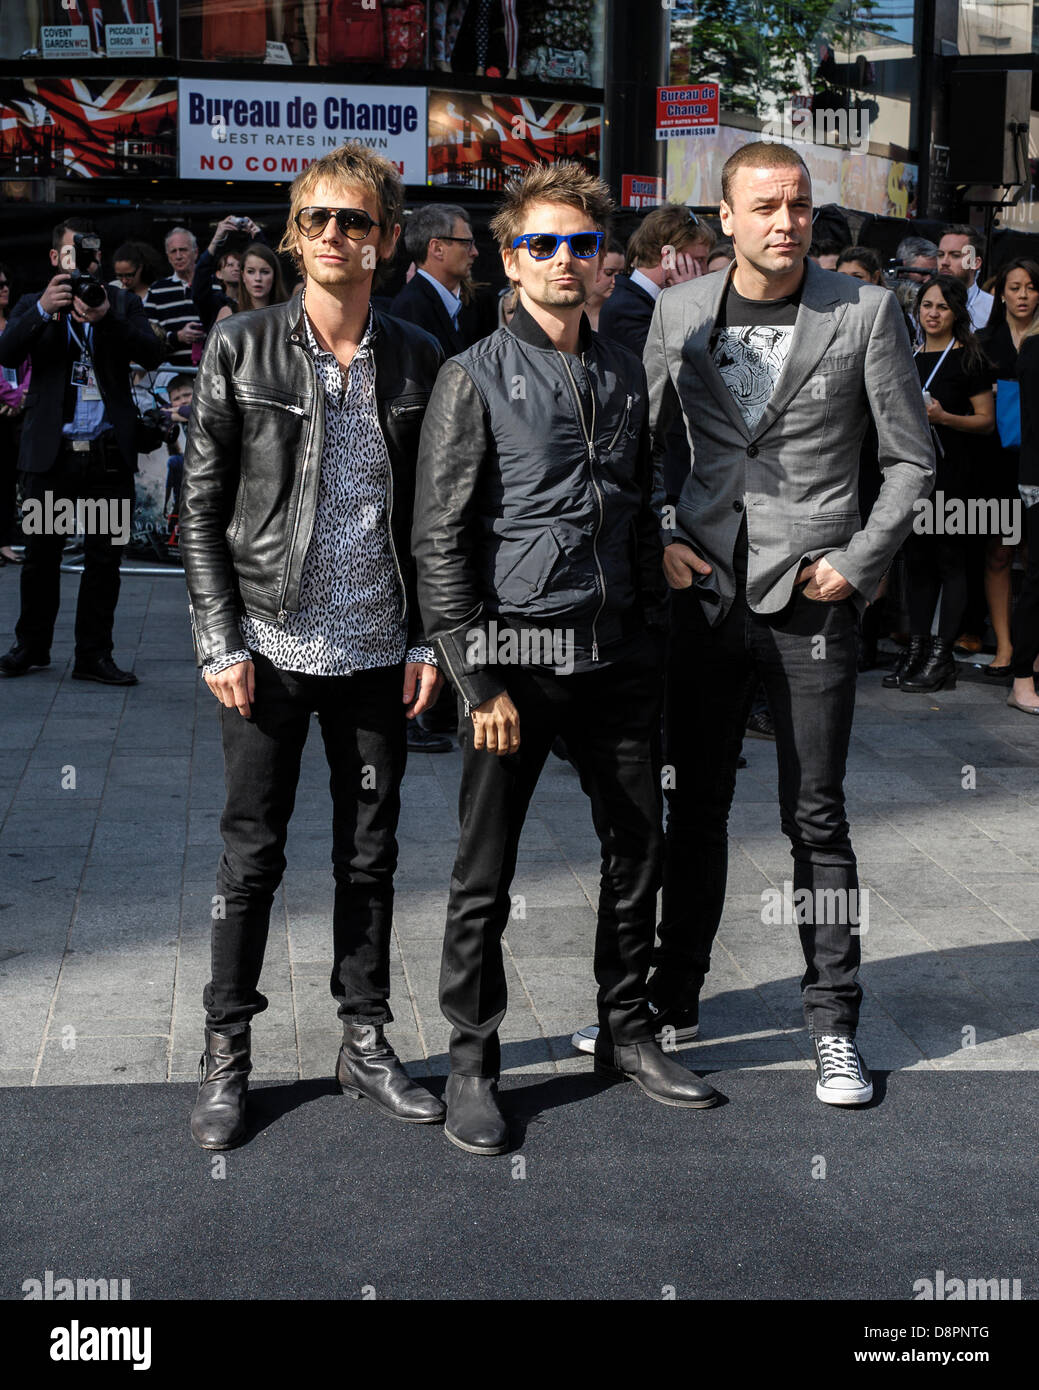 London, UK. 2nd June, 2013. Muse attends the World Premiere of World War Z at The Empire Leicester Square, London. Persons pictured: Dominic Howard, Matthew Bellamy, Chris Wolstenholme. Picture by Julie Edwards Stock Photo